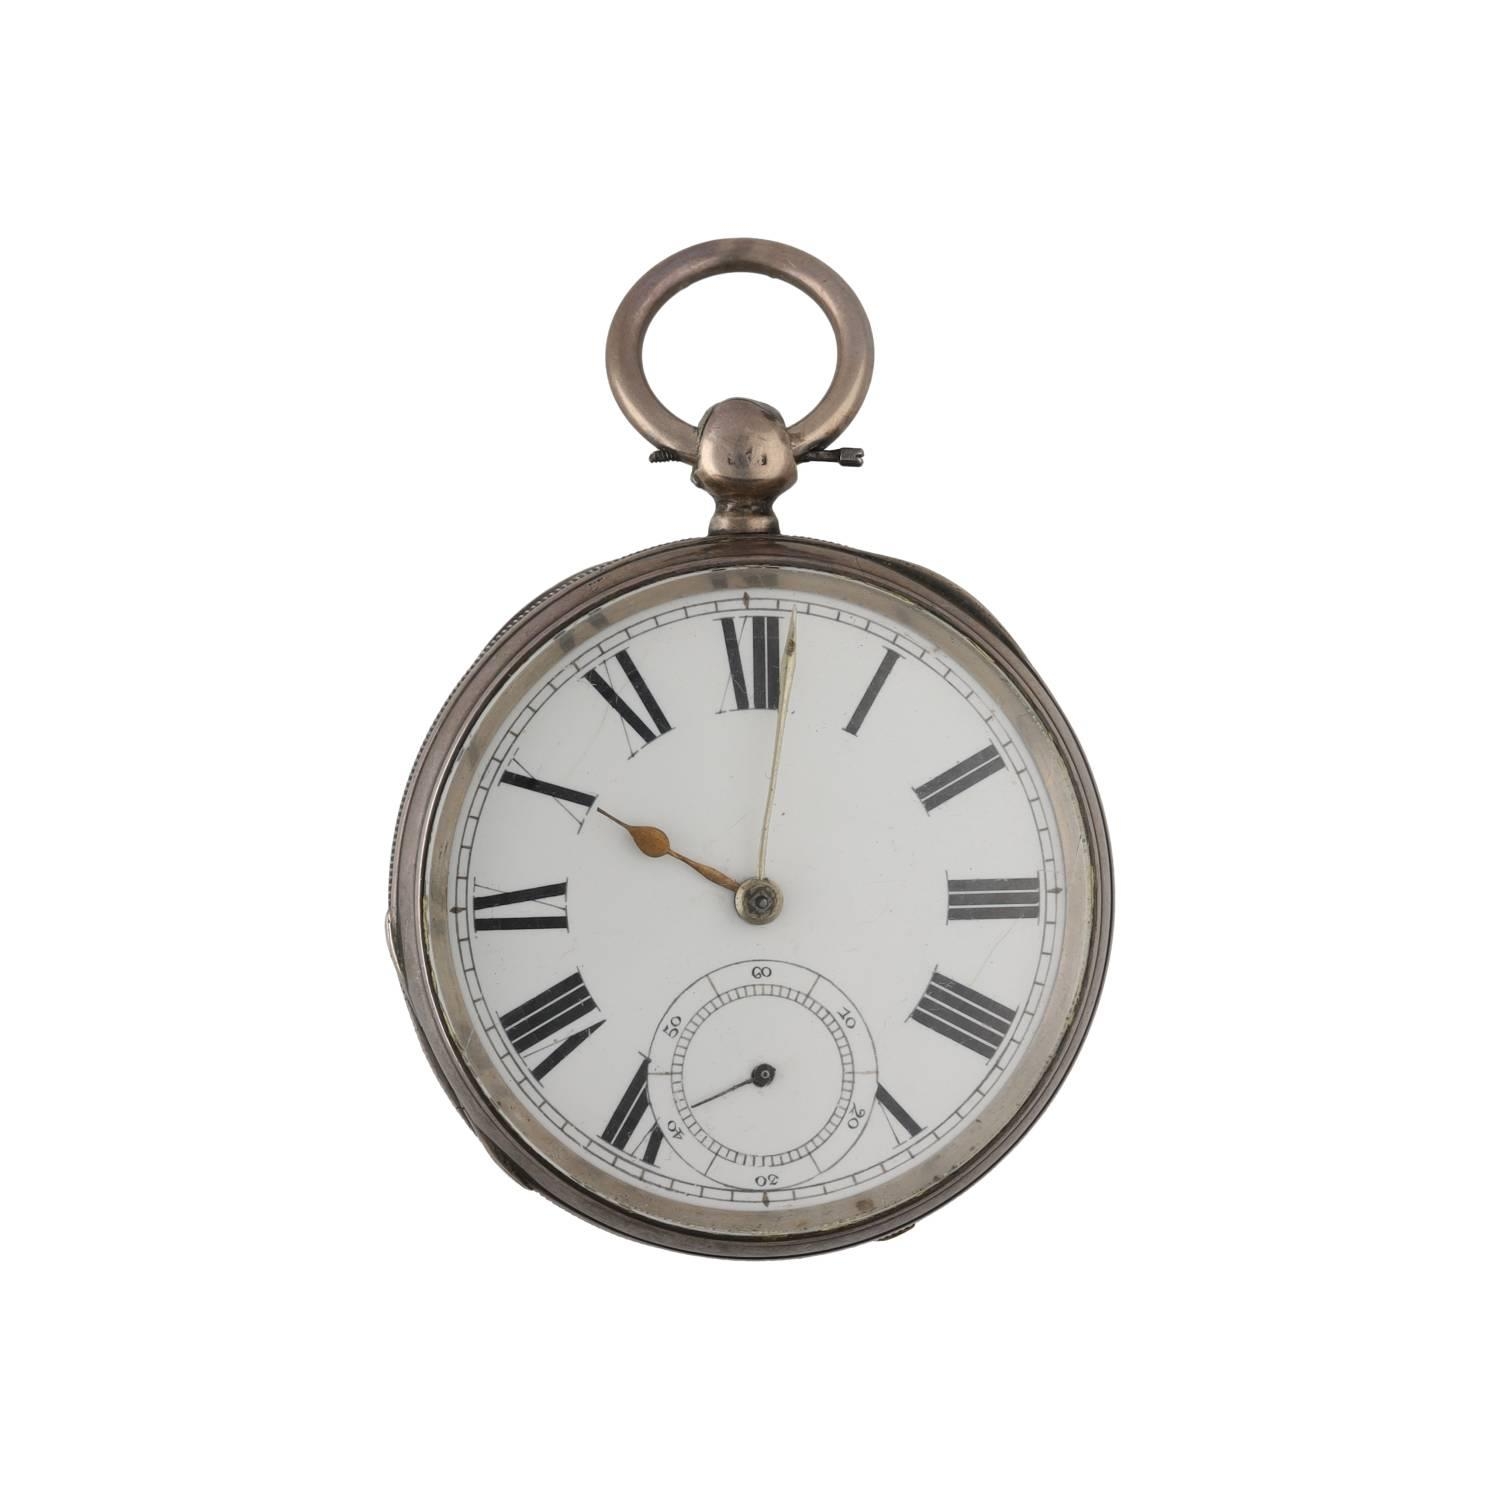 American Waltham silver lever pocket watch, circa 1884, serial no. 2355992, signed movement with